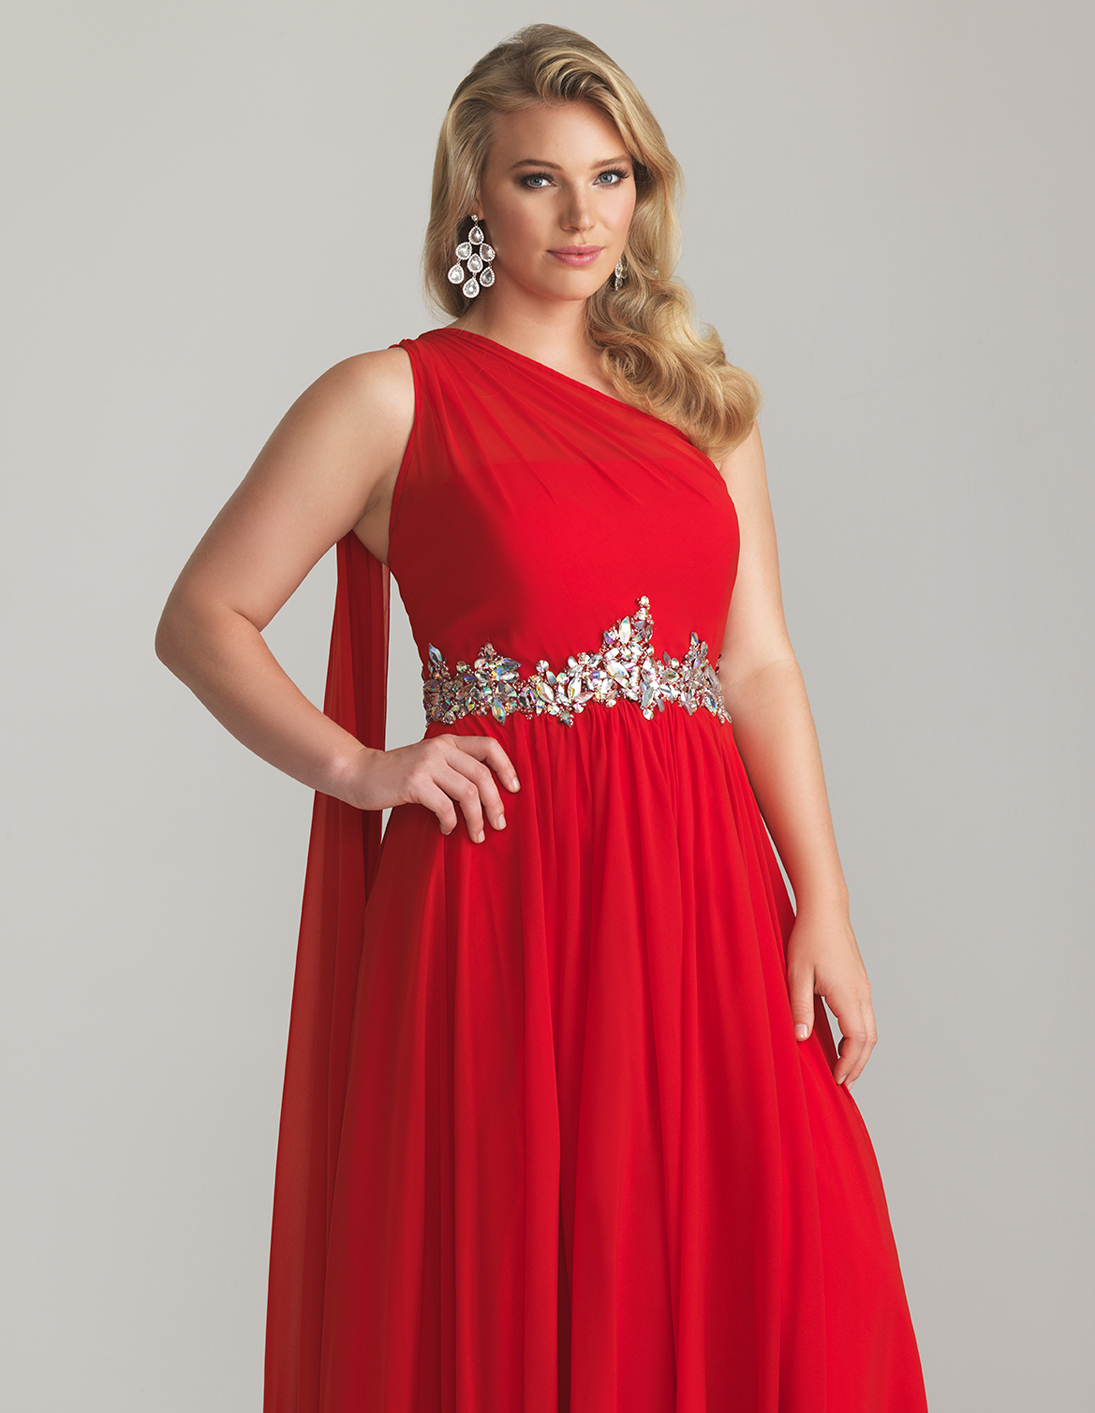 Plus Size Prom Dresses | Dressed Up Girl